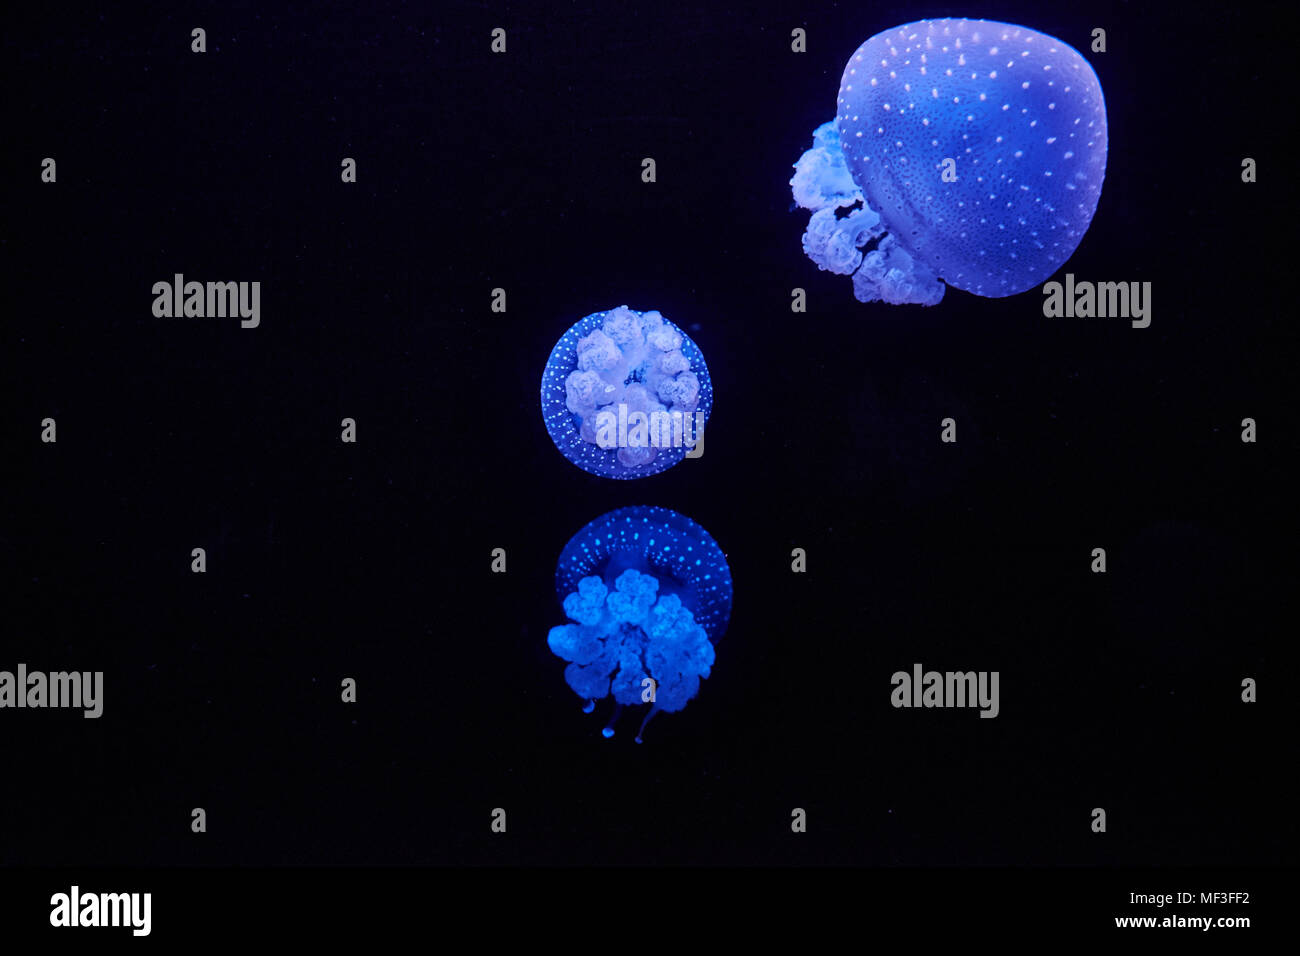 Blue shining jellyfish in front of black background Stock Photo